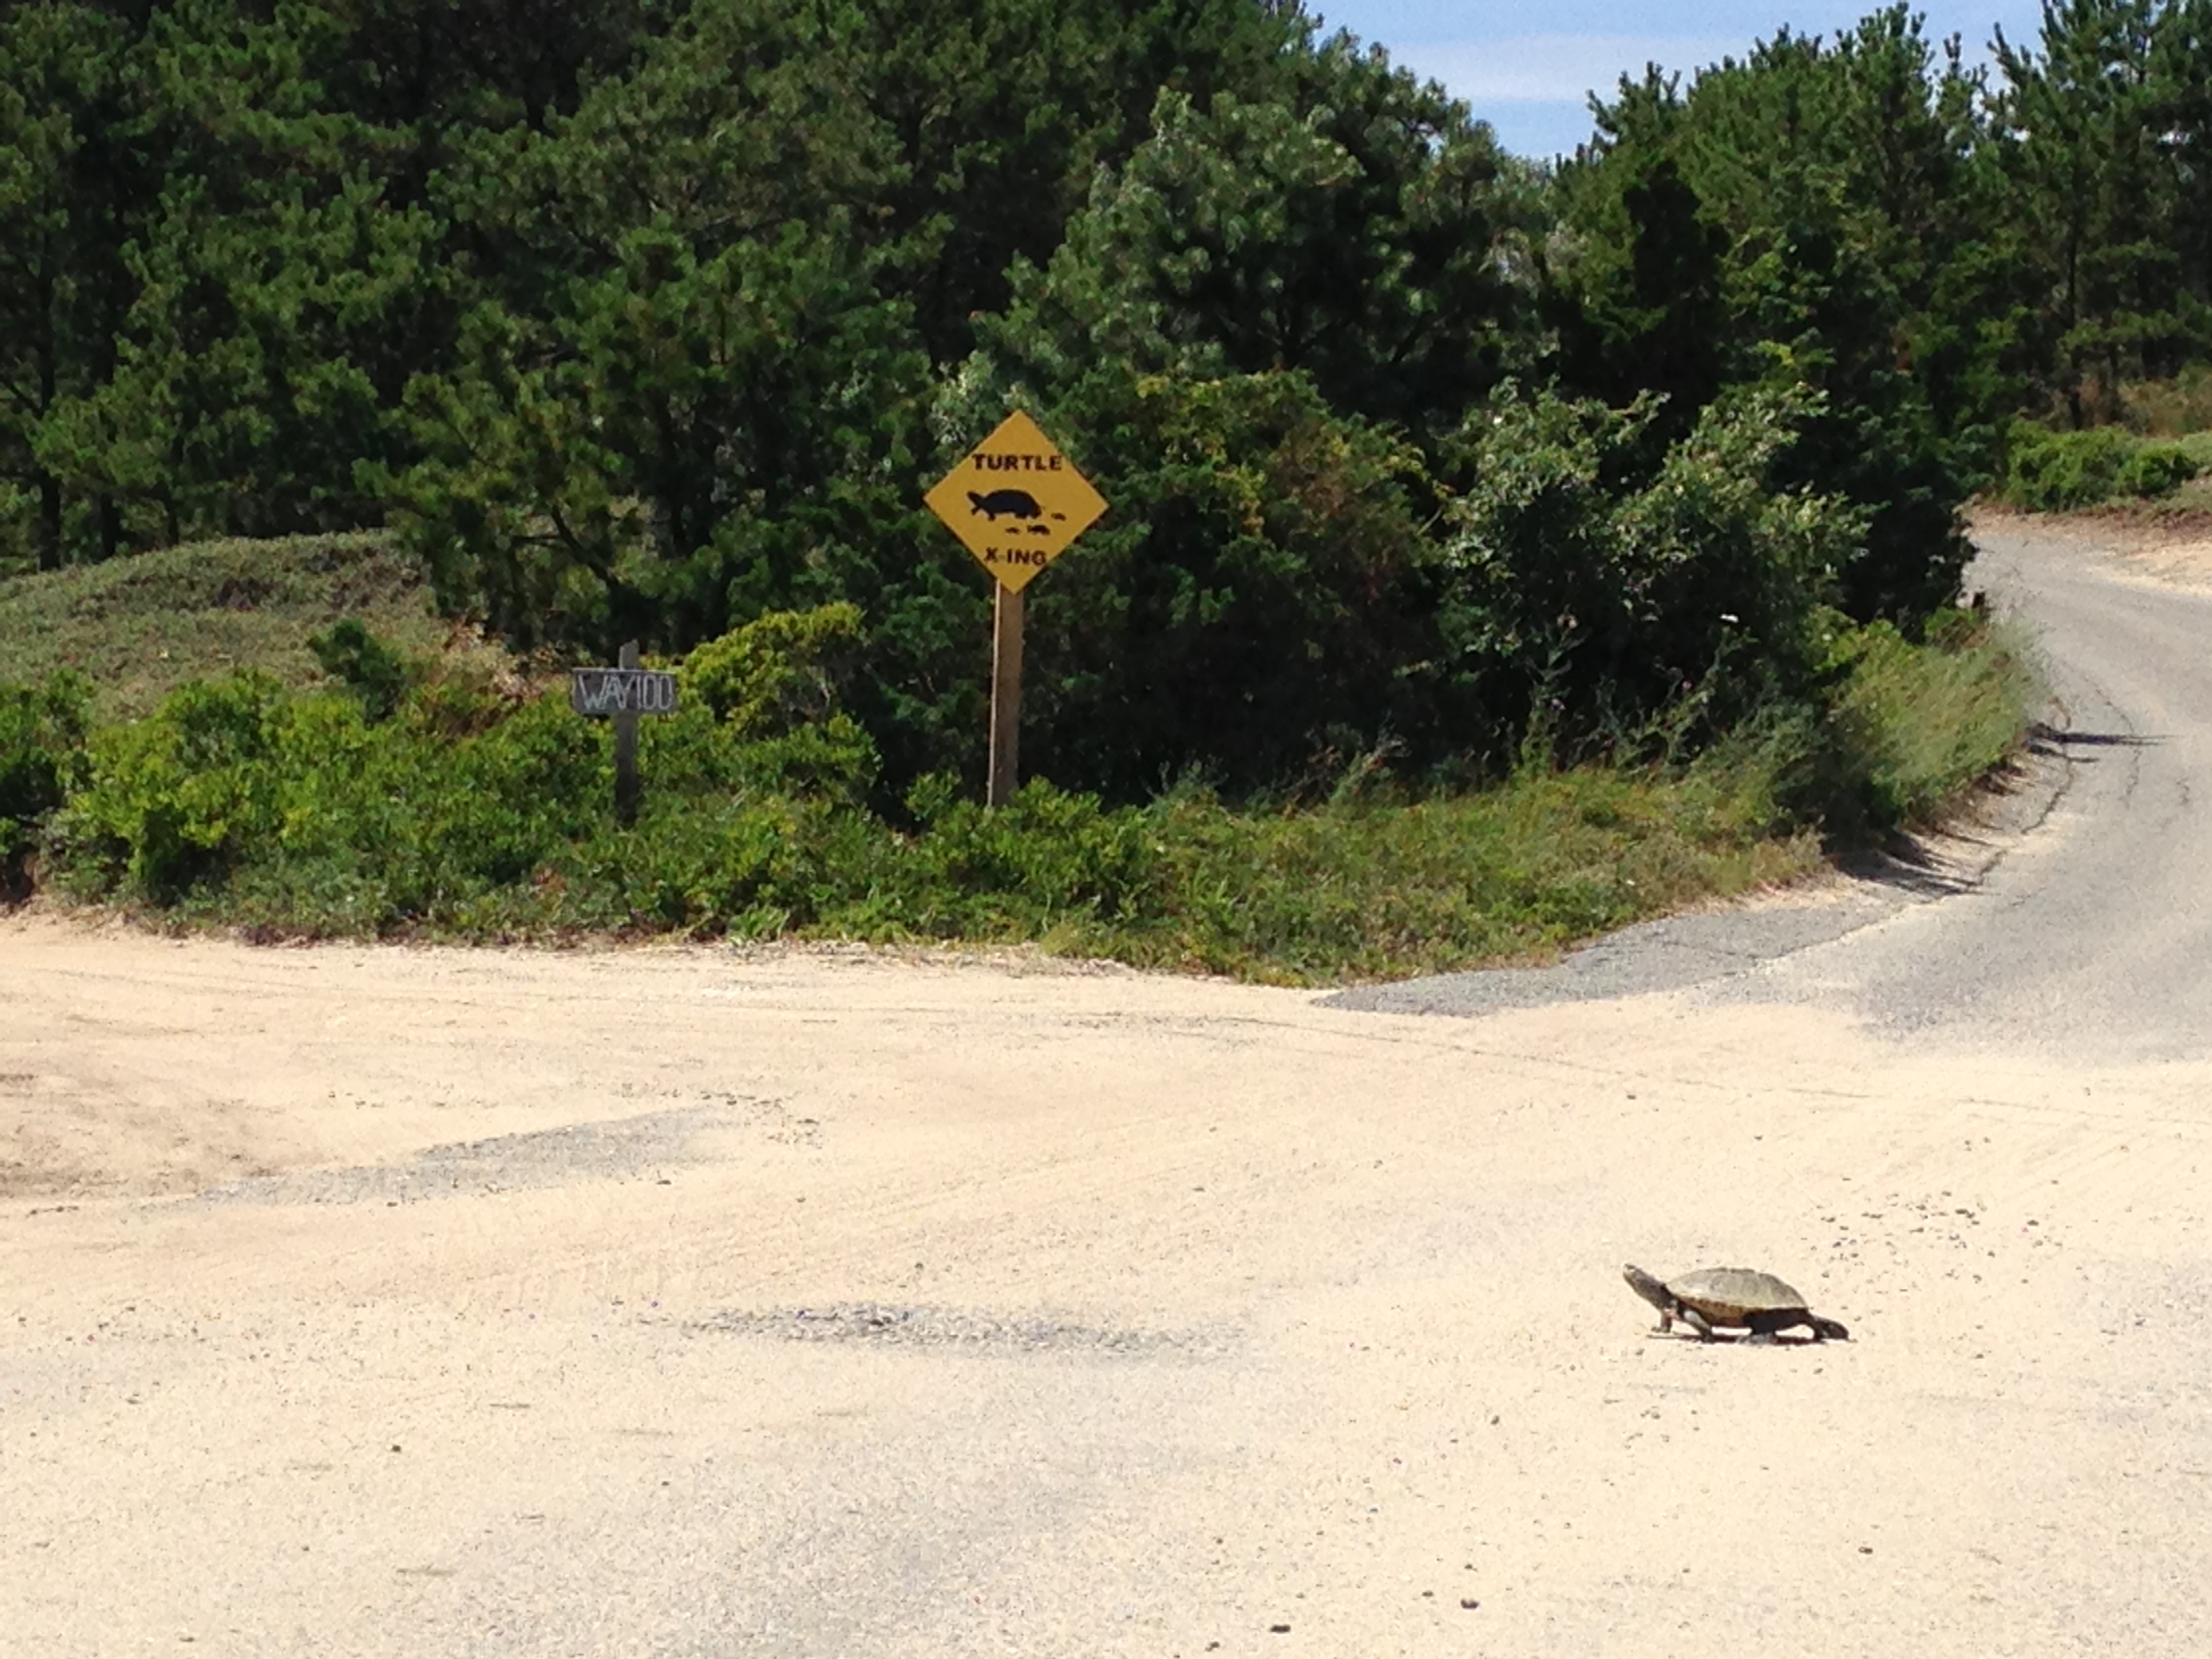 Terrapin crossing road to or from nesting.